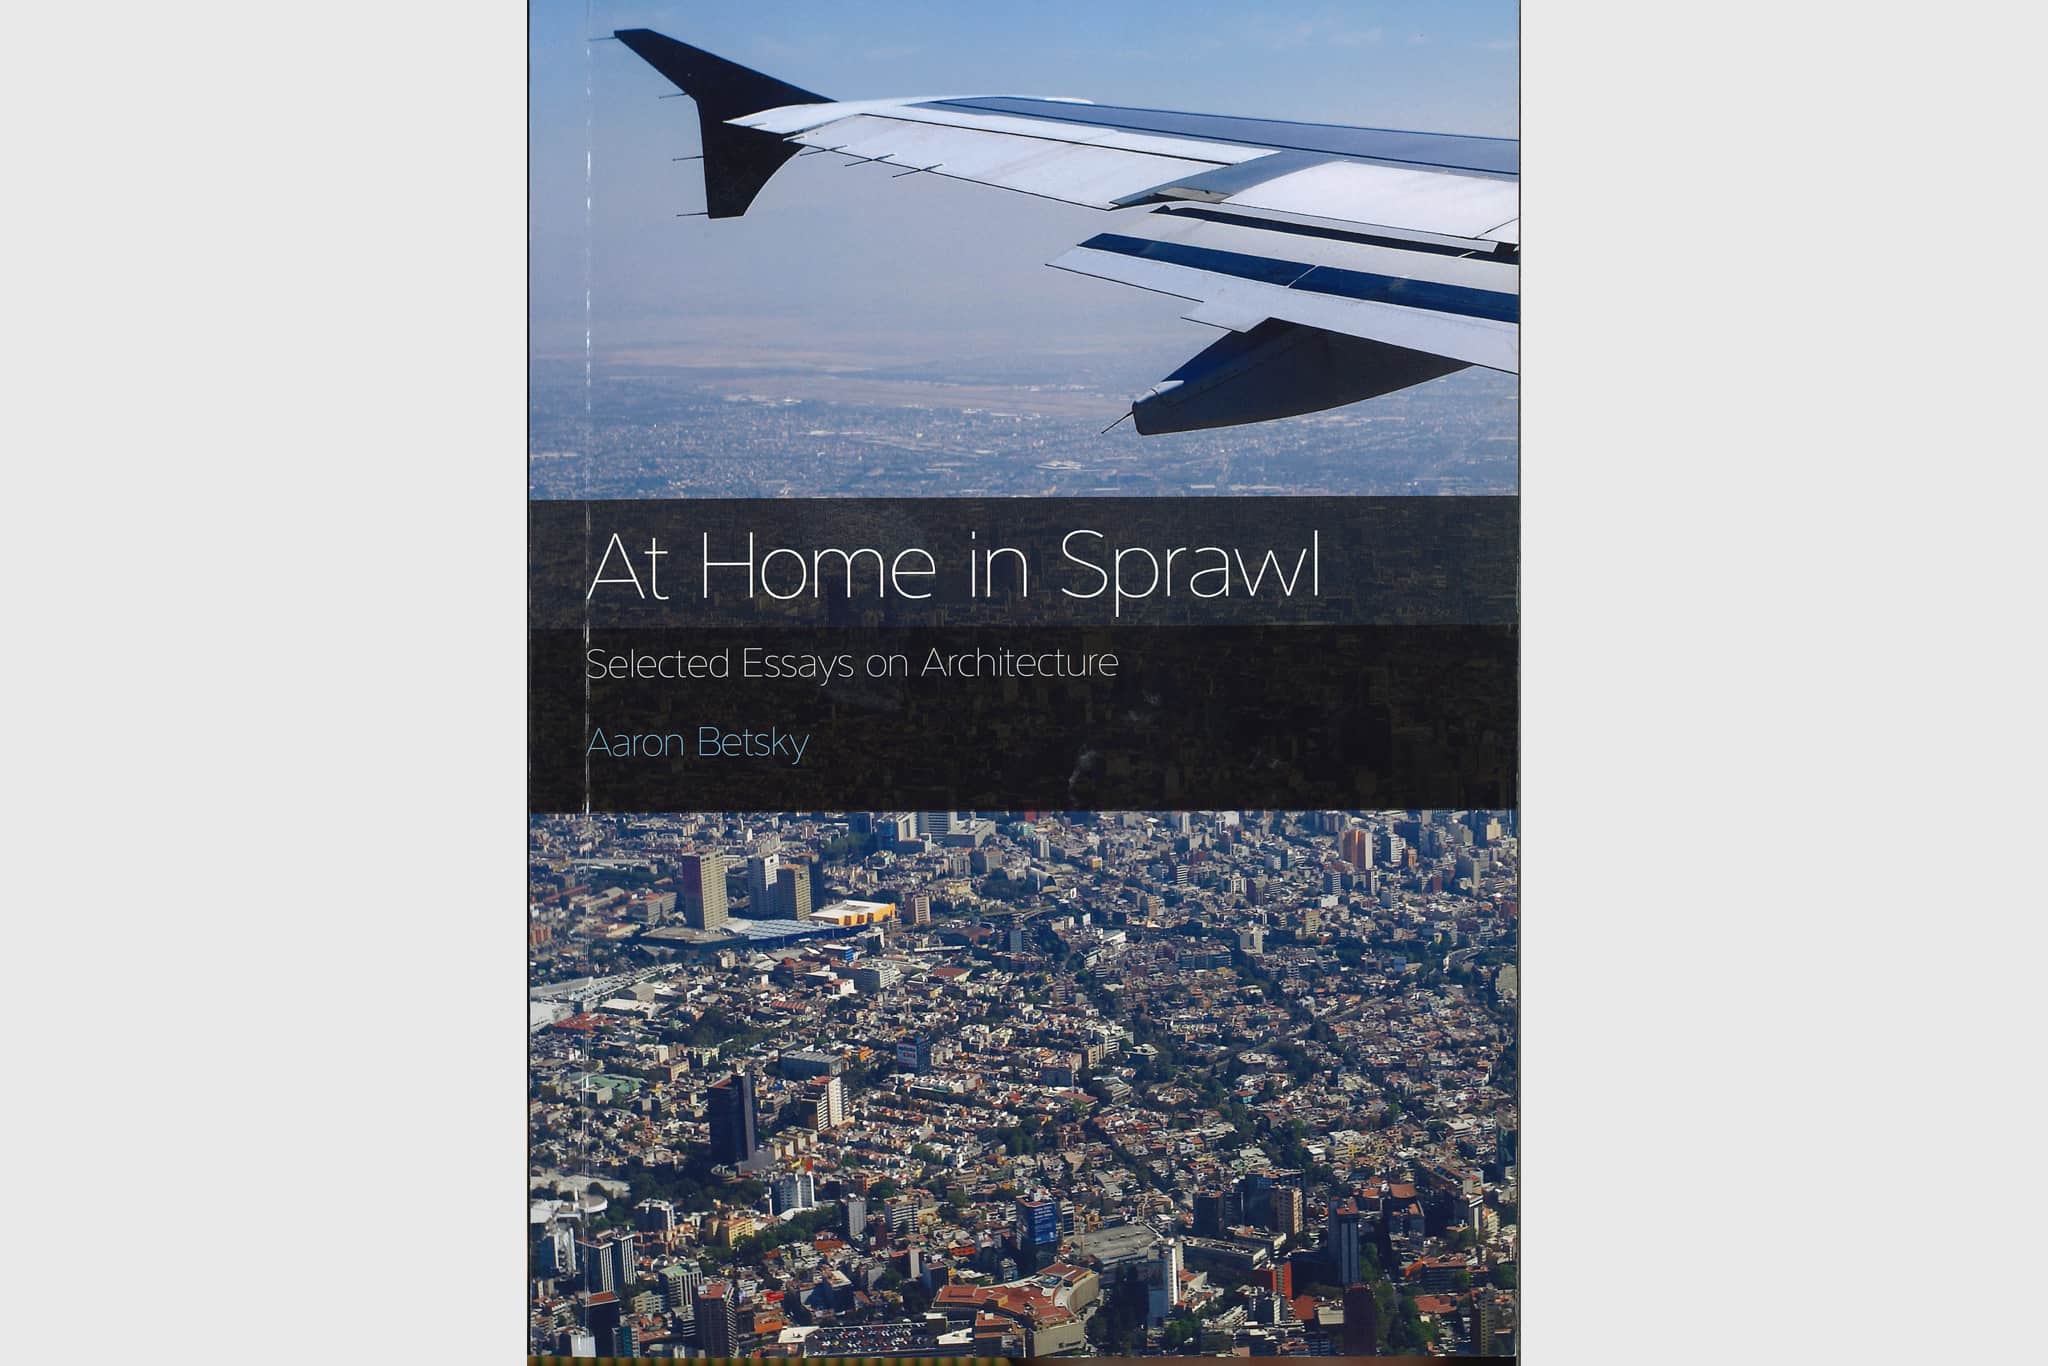 At home in sprawl book cover